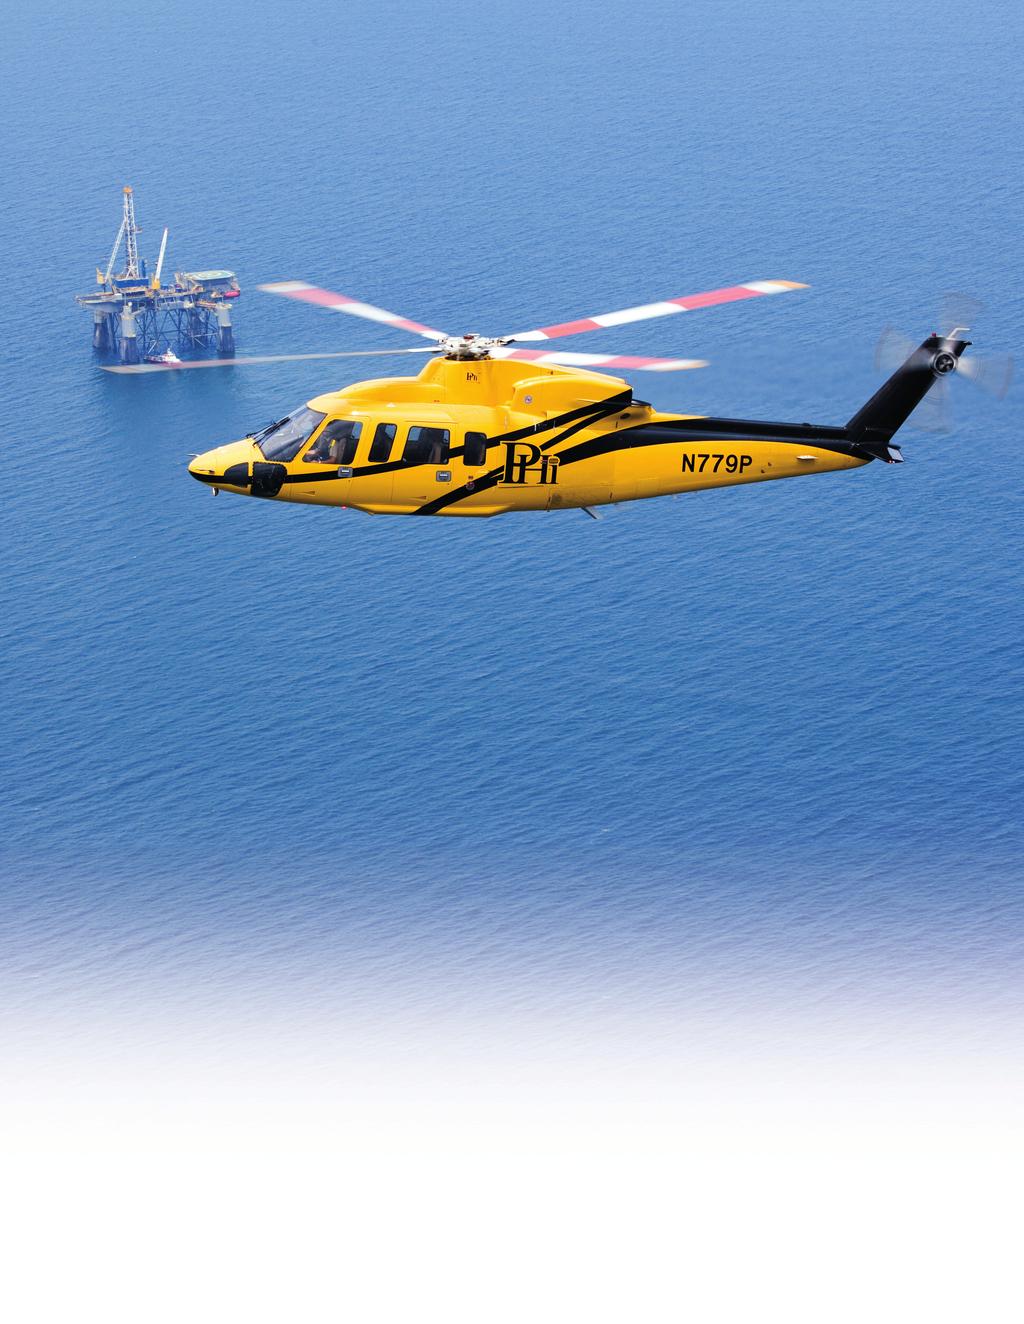 IN D U S T RY PHI Inc. is the first operator in the Gulf of Mexico to equip its IFR fleet with ADS-B technology.